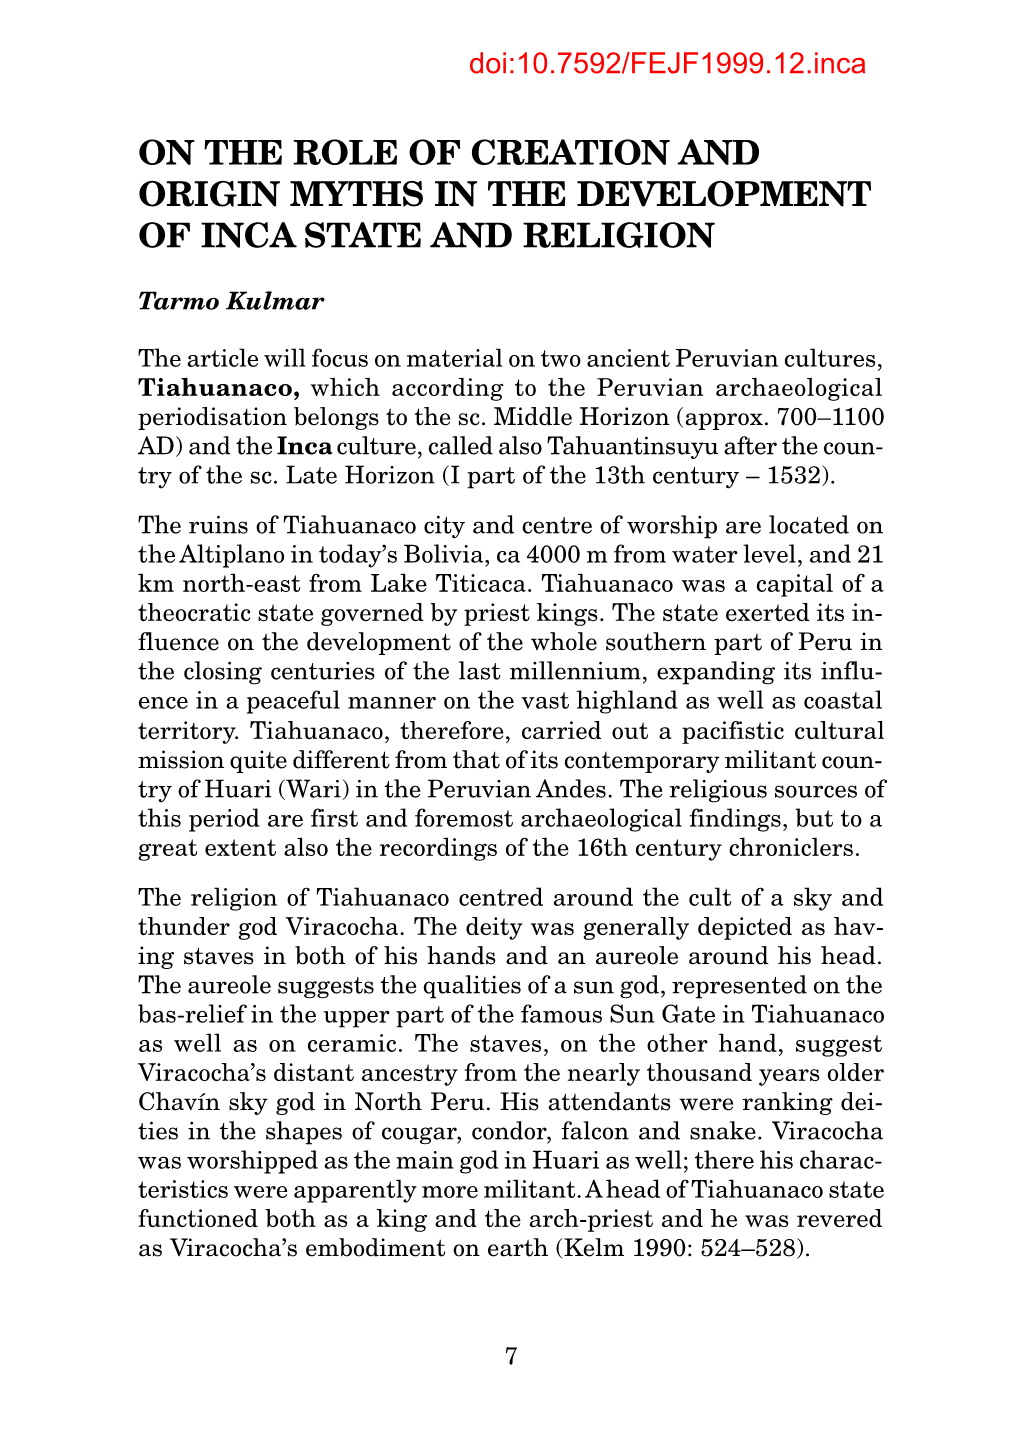 On the Role of Creation and Origin Myths in the Development of Inca State and Religion